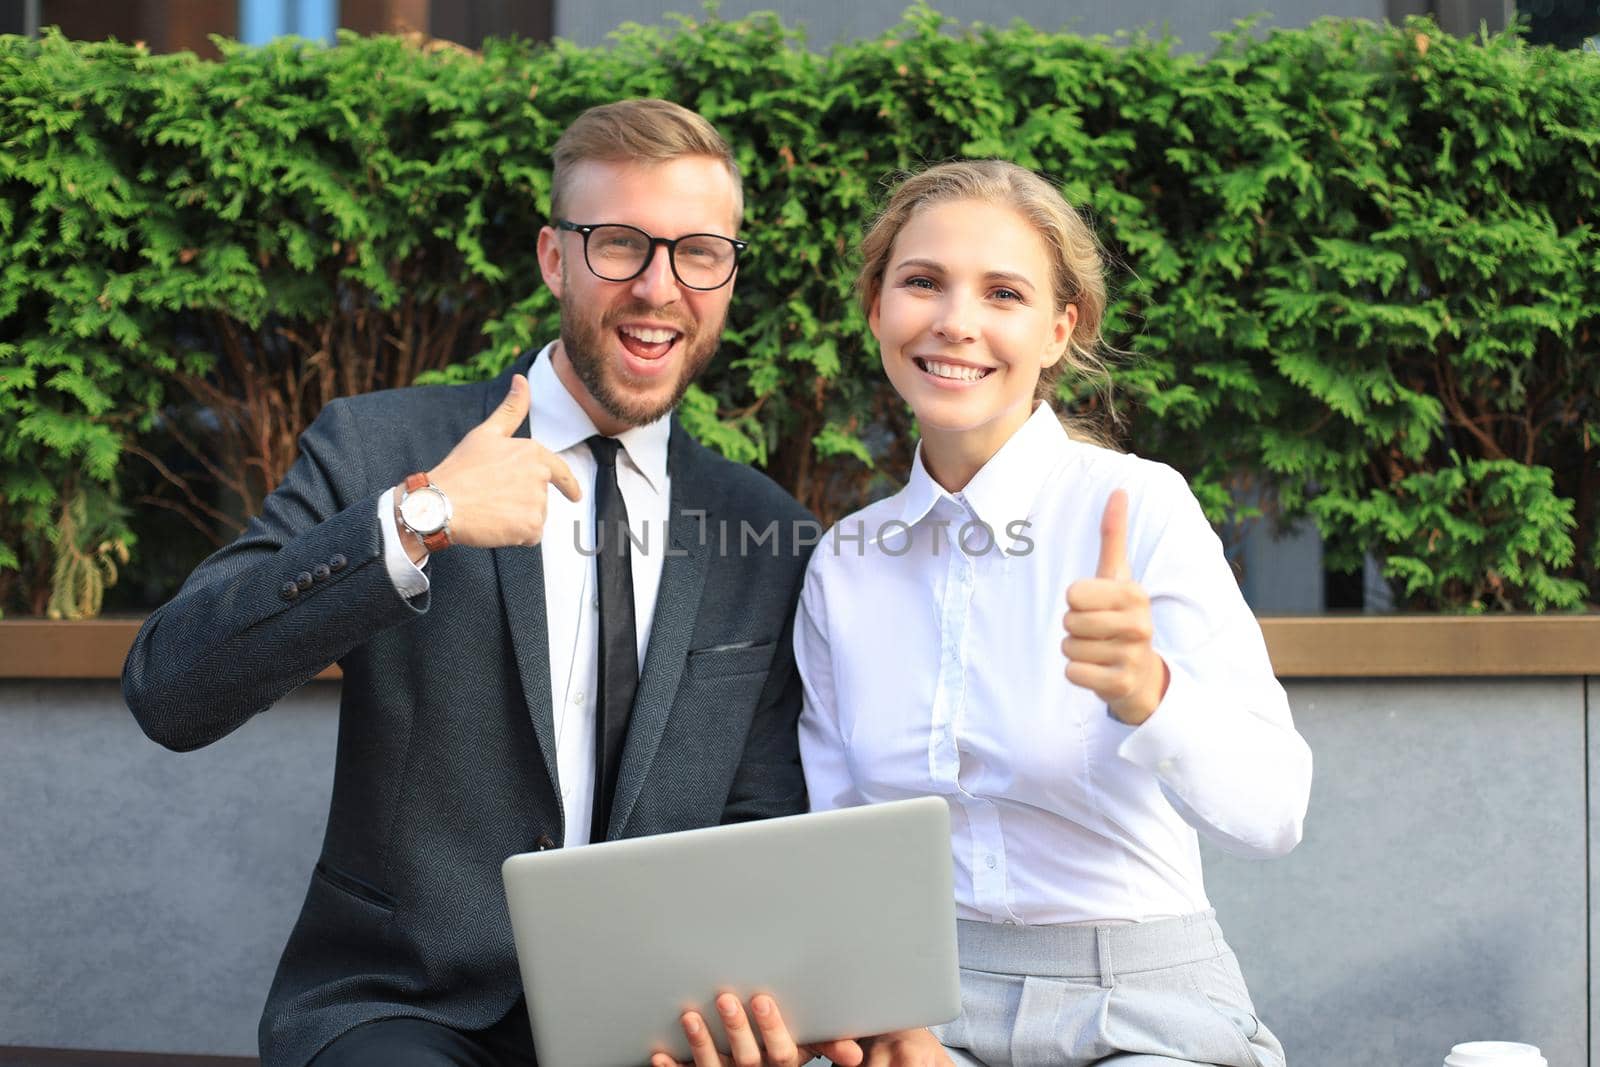 Office colleagues using laptop computer and showing thumbs up while sitting on a bench outdoor